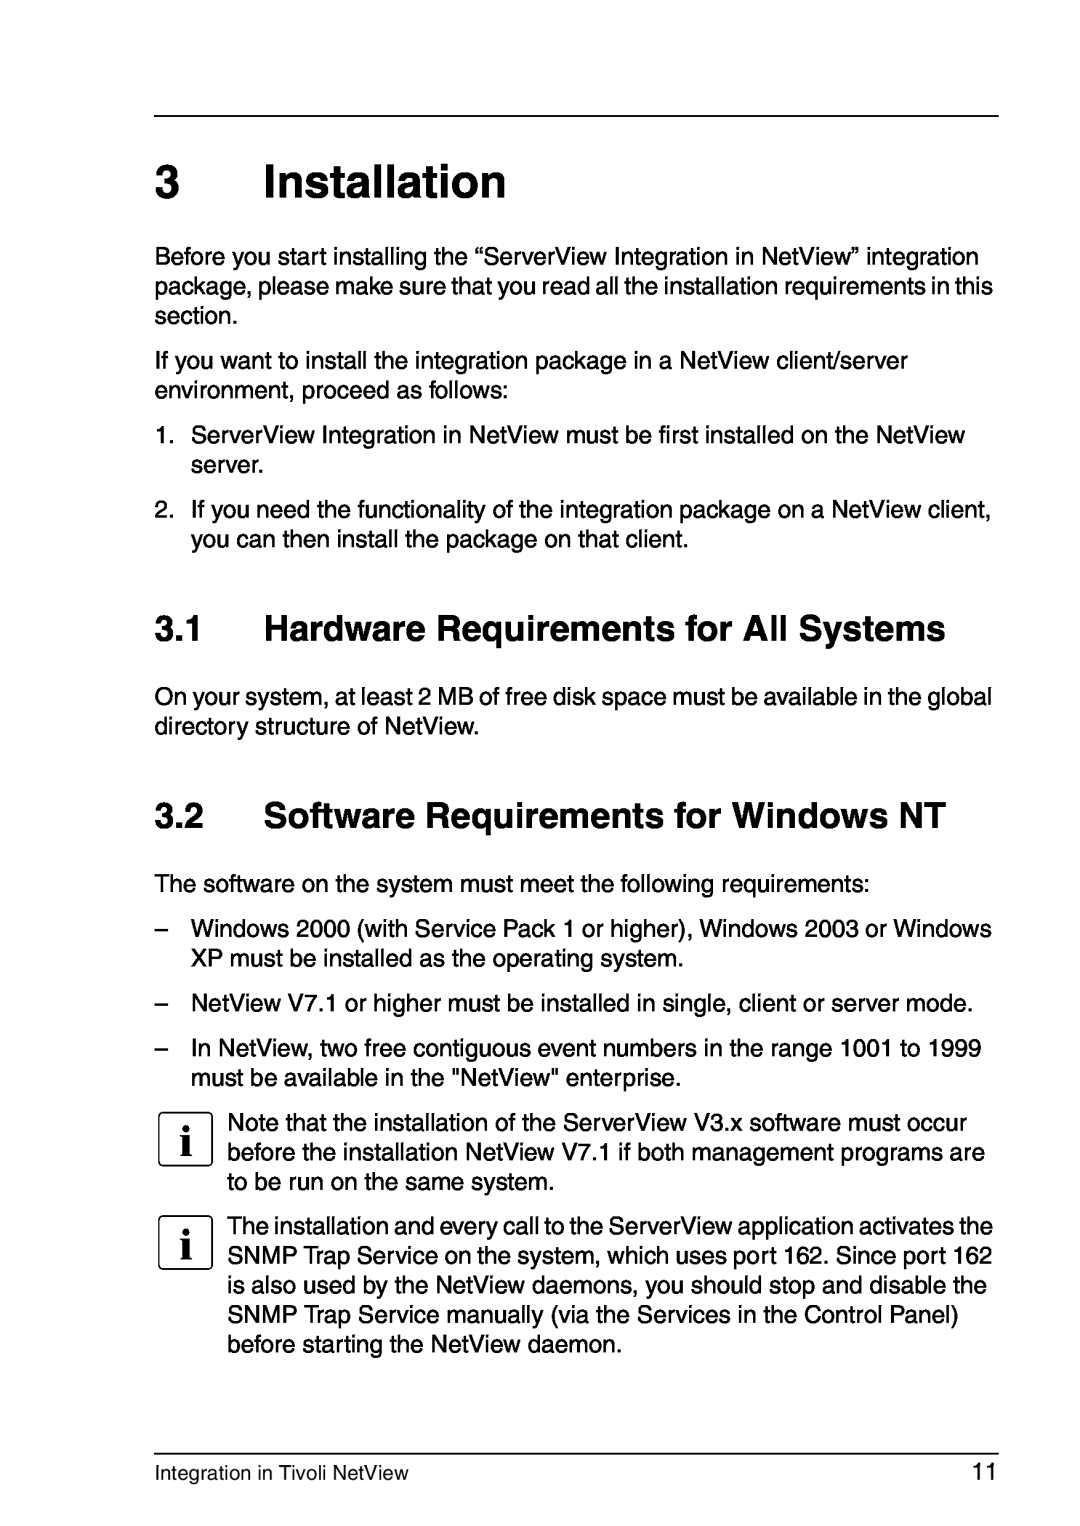 3D Connexion TivoII manual Installation, 3.1Hardware Requirements for All Systems, 3.2Software Requirements for Windows NT 